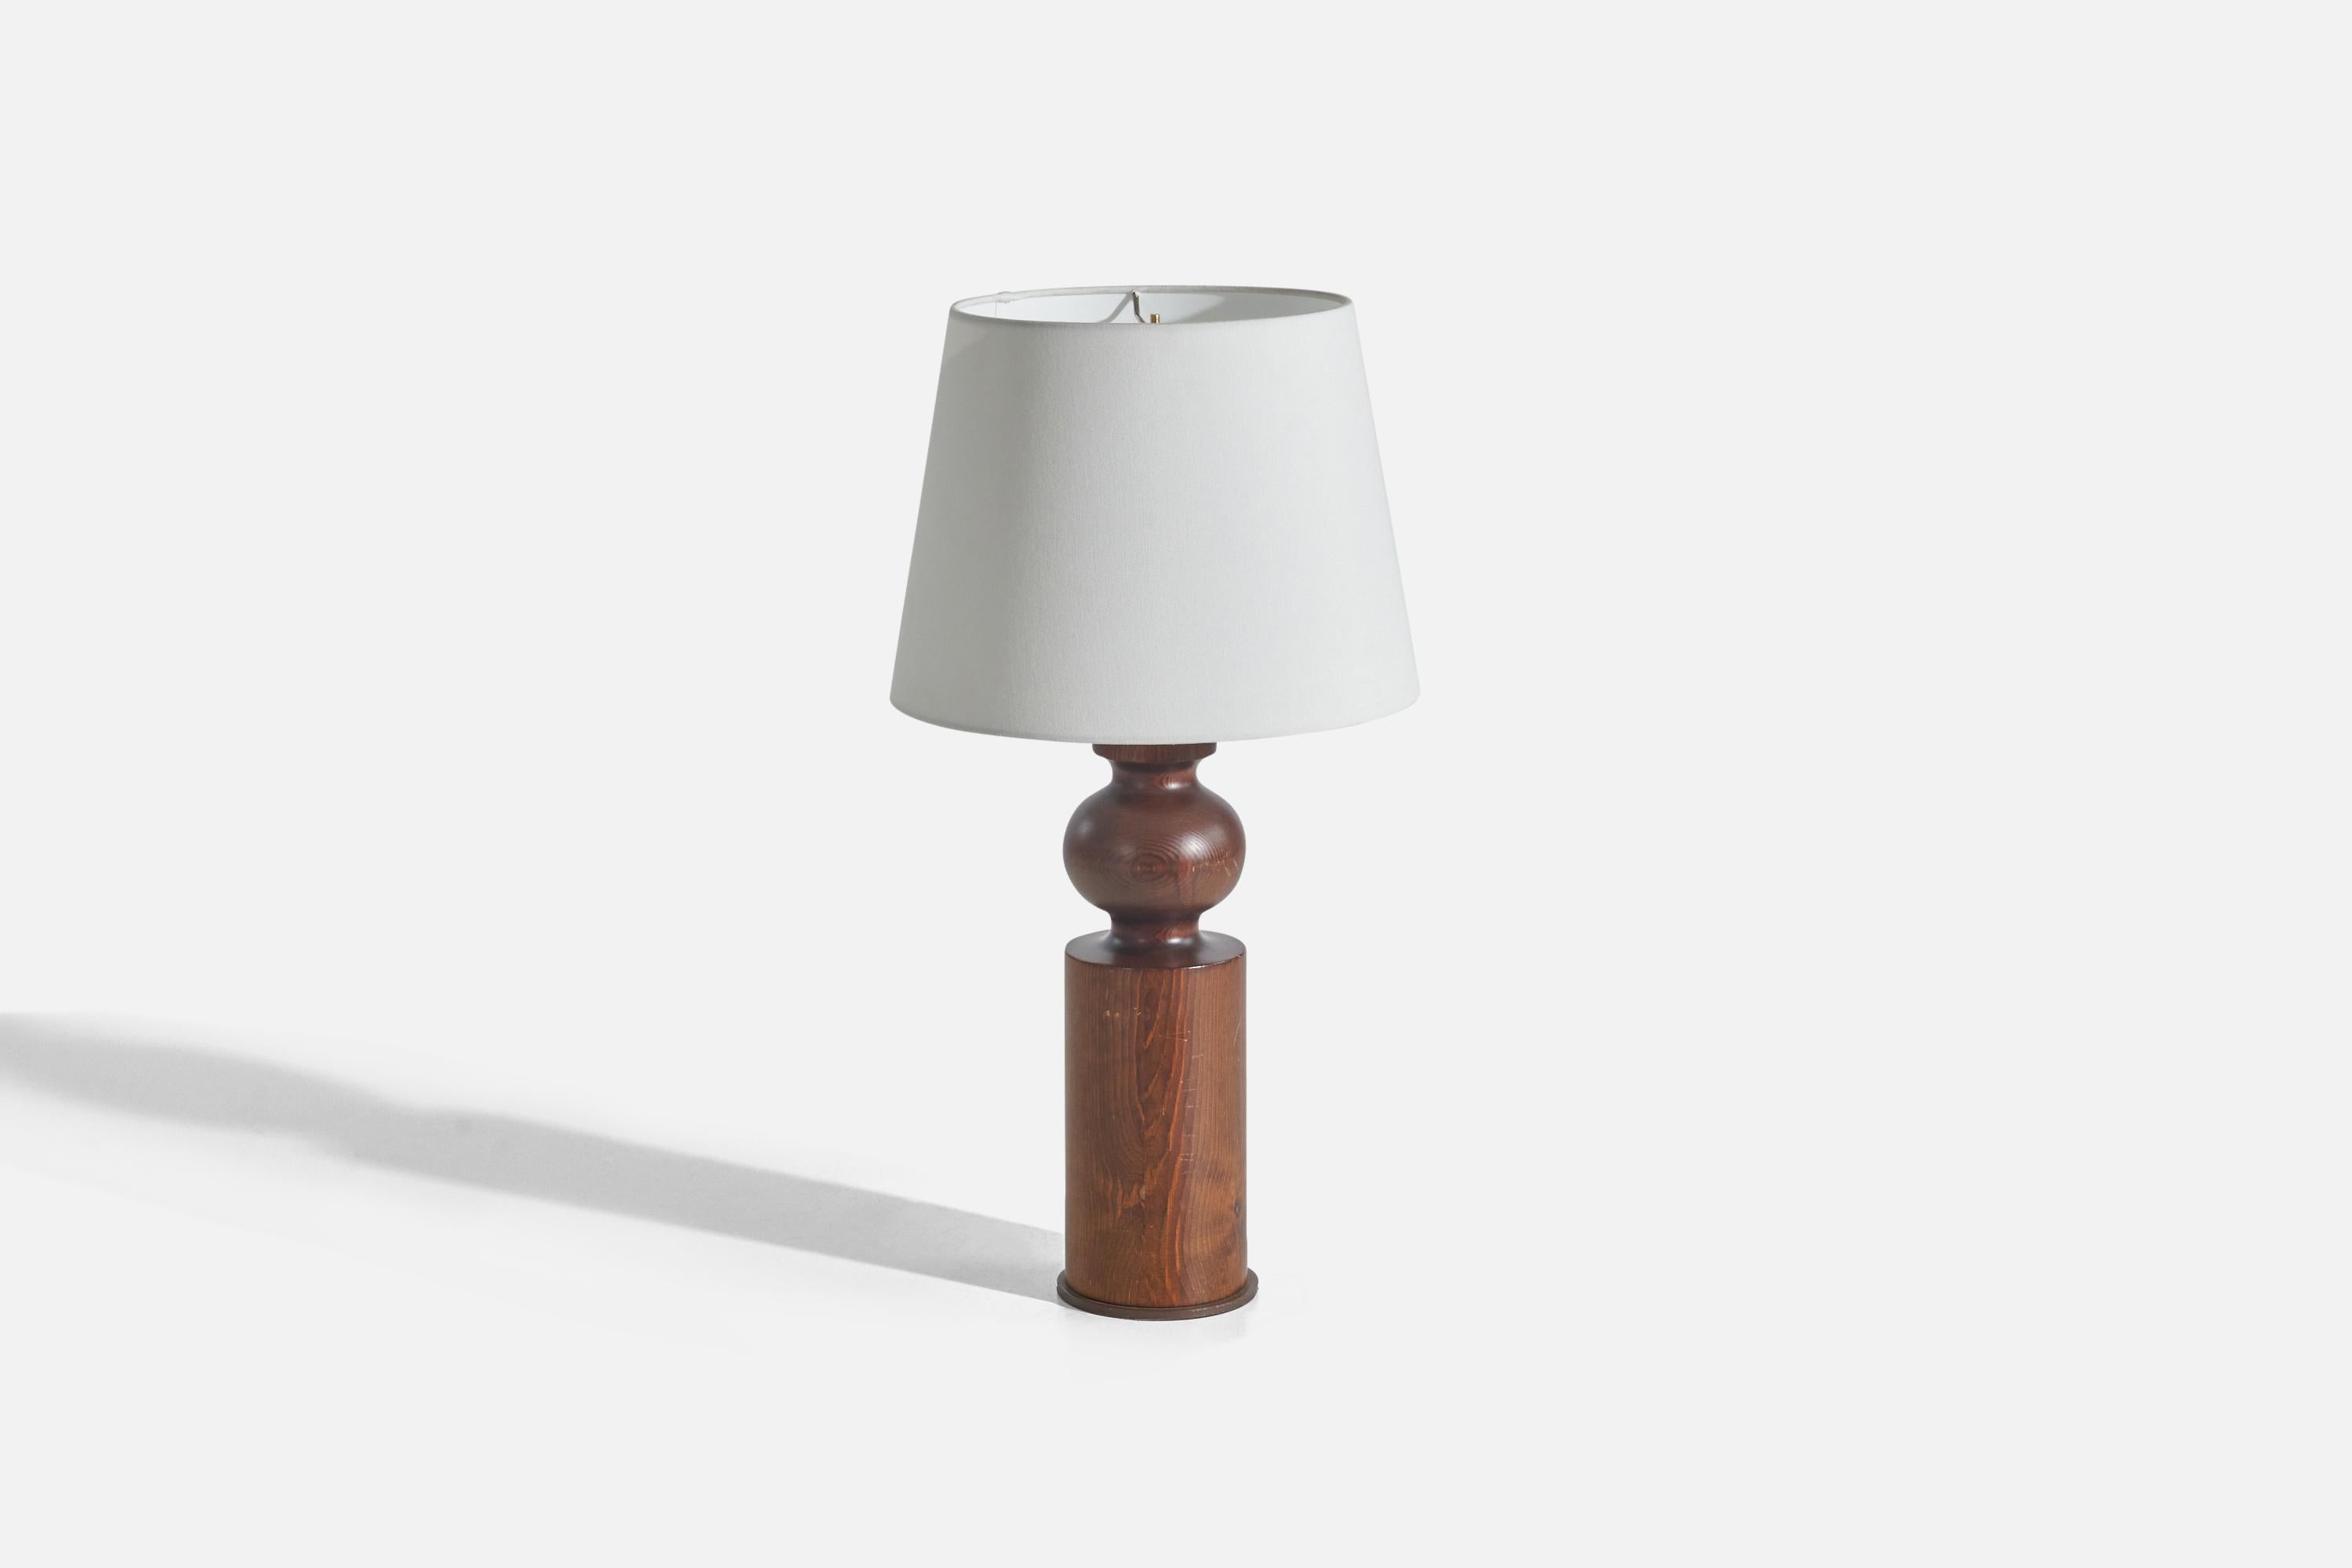 A solid pine table lamp designed by Uno Kristiansson and produced by Luxus, Sweden, 1960s.

Sold without lampshade(s)
Dimensions of lamp (inches) : 17.25 x 4.71 x 4.71 (Height x Width x Depth)
Dimensions of shade (inches) : 9 x 12 x 9 (Top